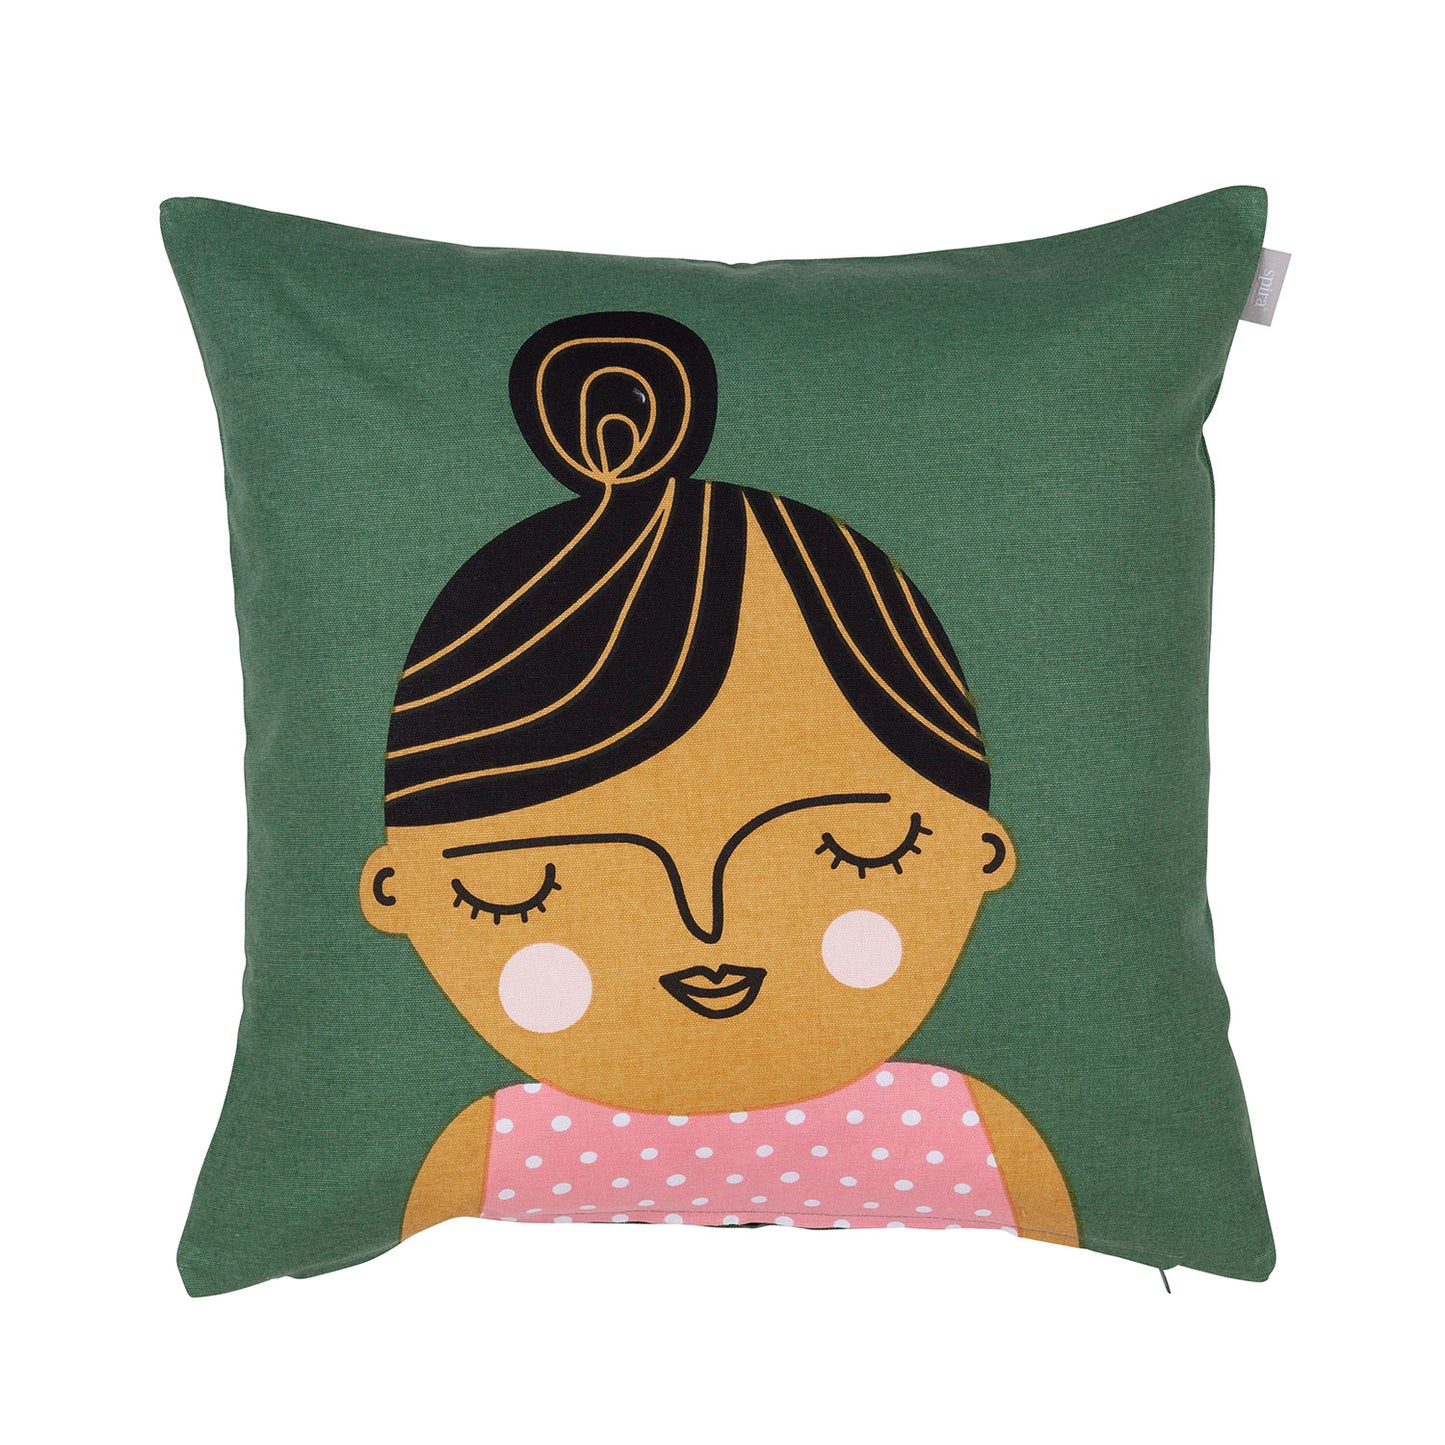 Pine green cushion cover with women's face with black hair in bun and pink and white polka dot shirt.